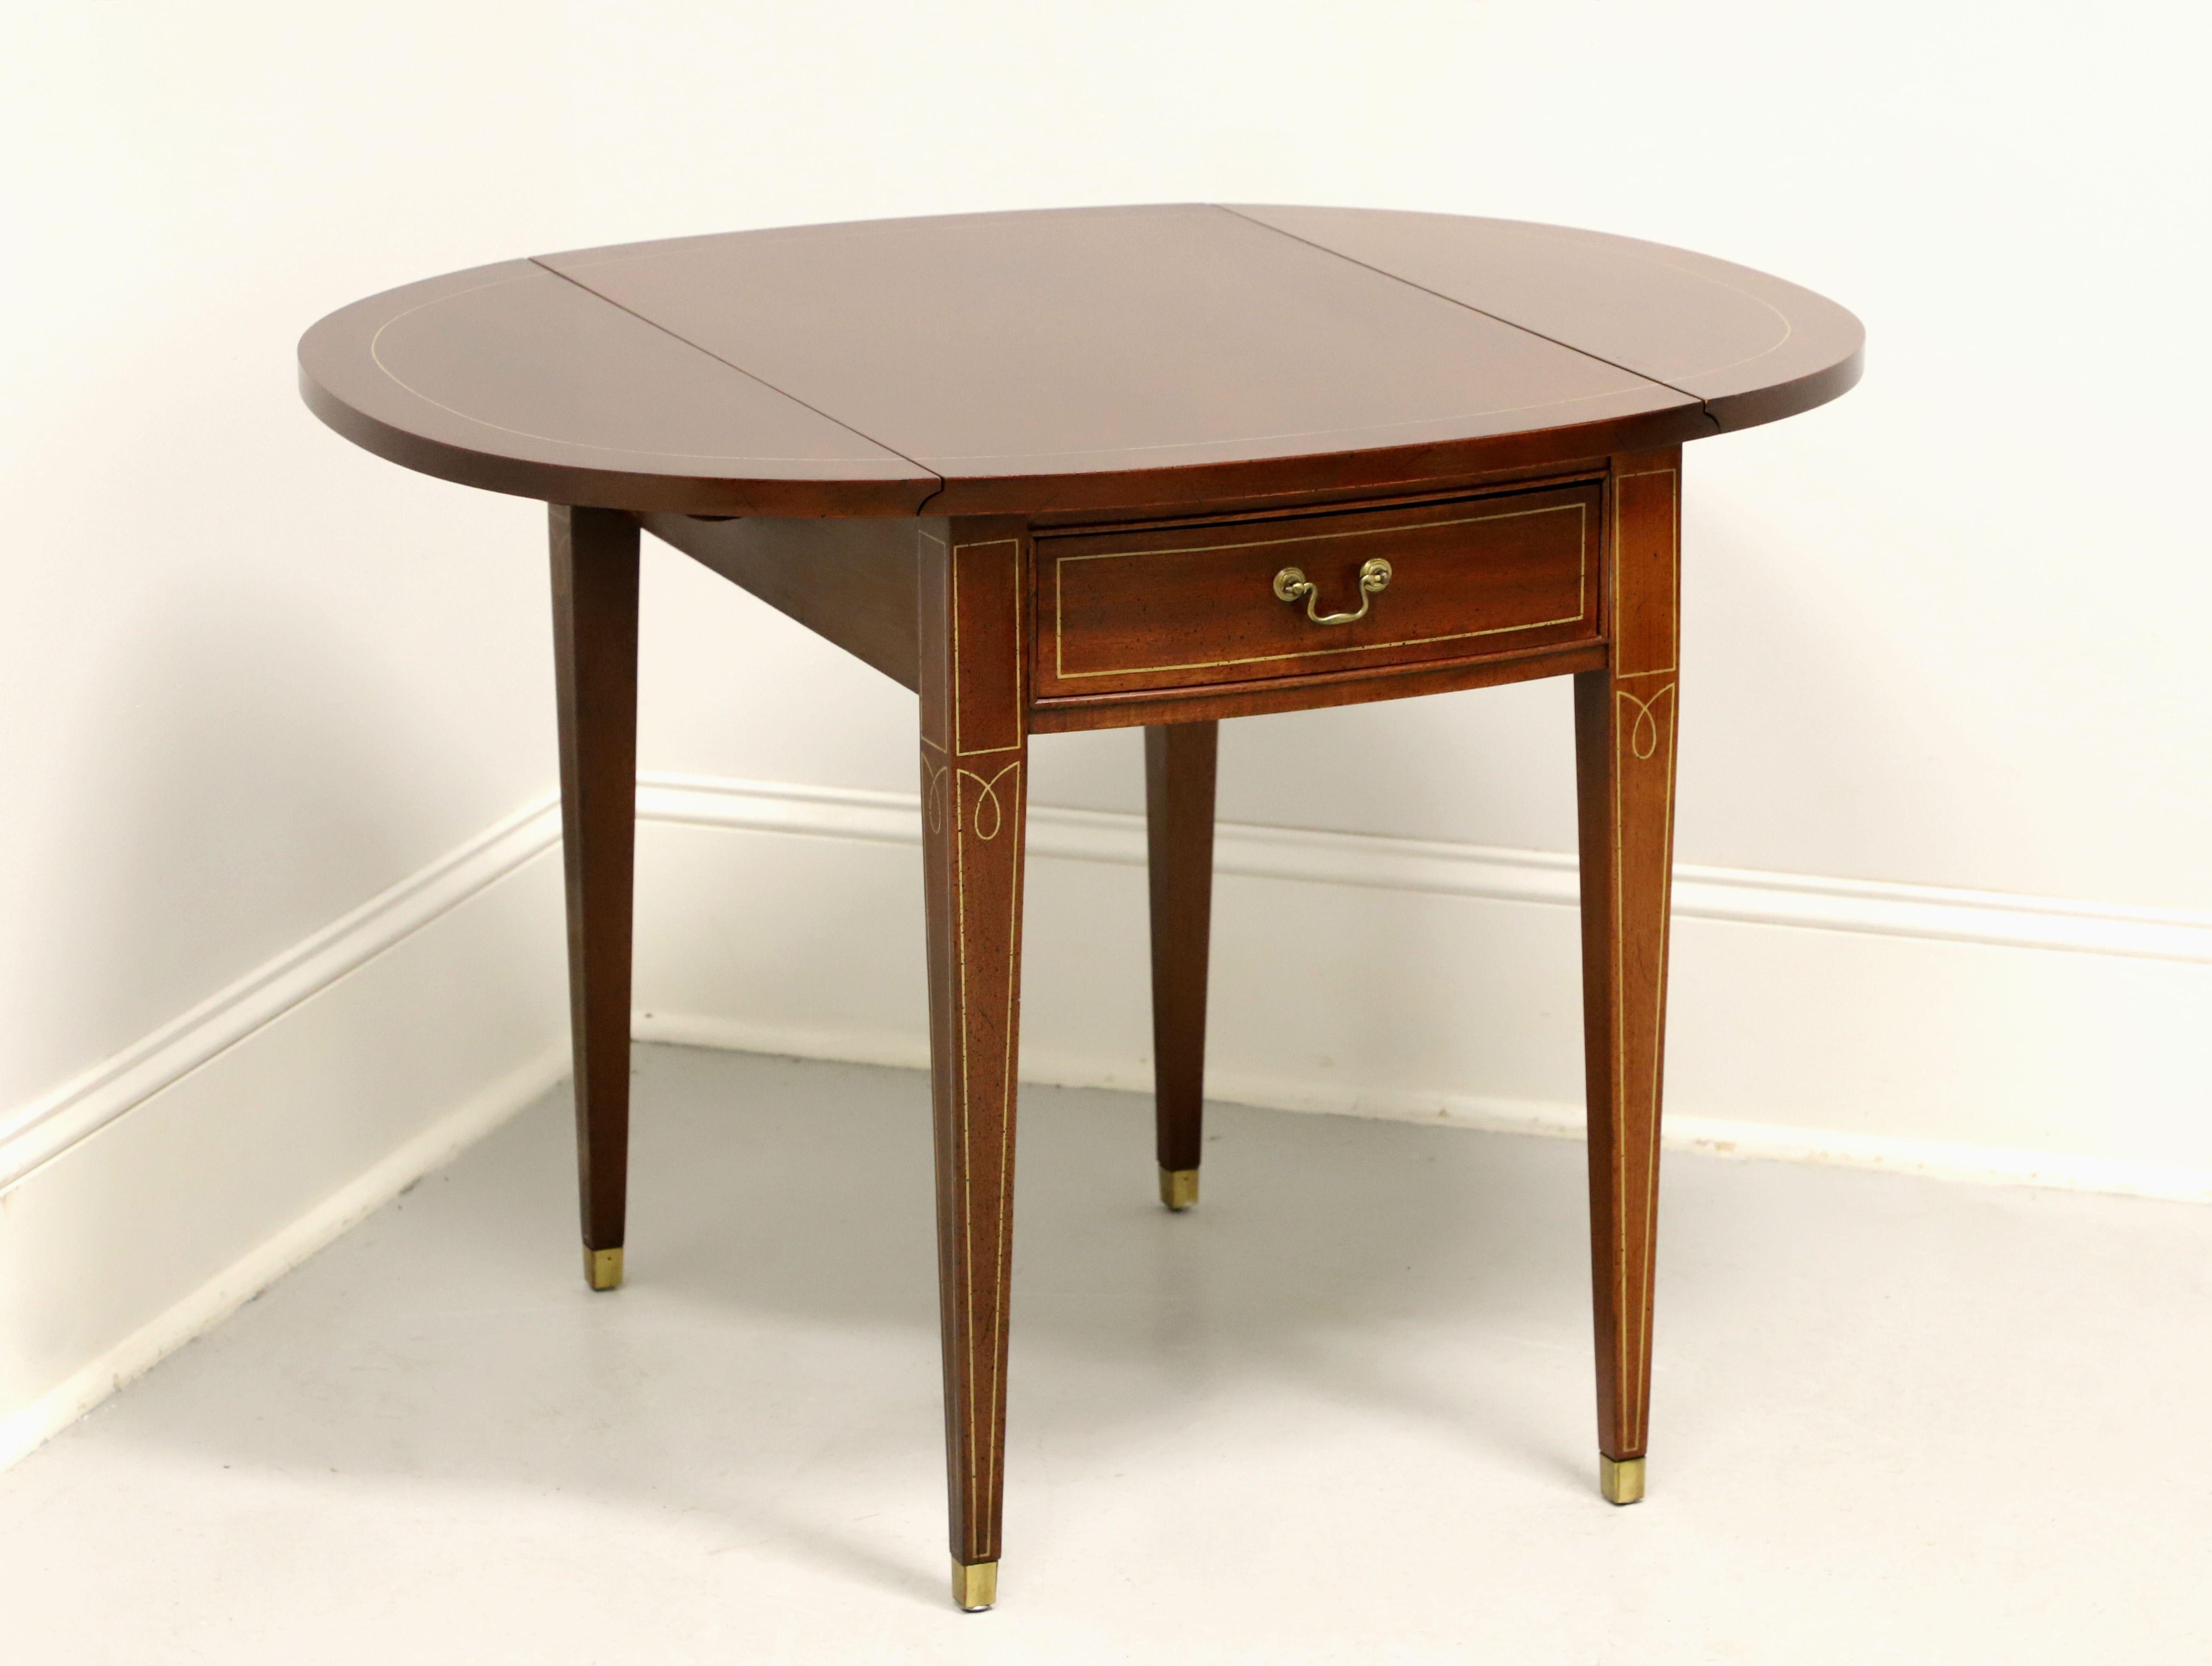 A Hepplewhite style Pembroke table by Hickory Chair, from their Historical James River Plantations Collection. Inlaid mahogany, inlaid string details, drop leaves, brass hardware, tapered straight legs, and brass toe caps. Features one drawer of